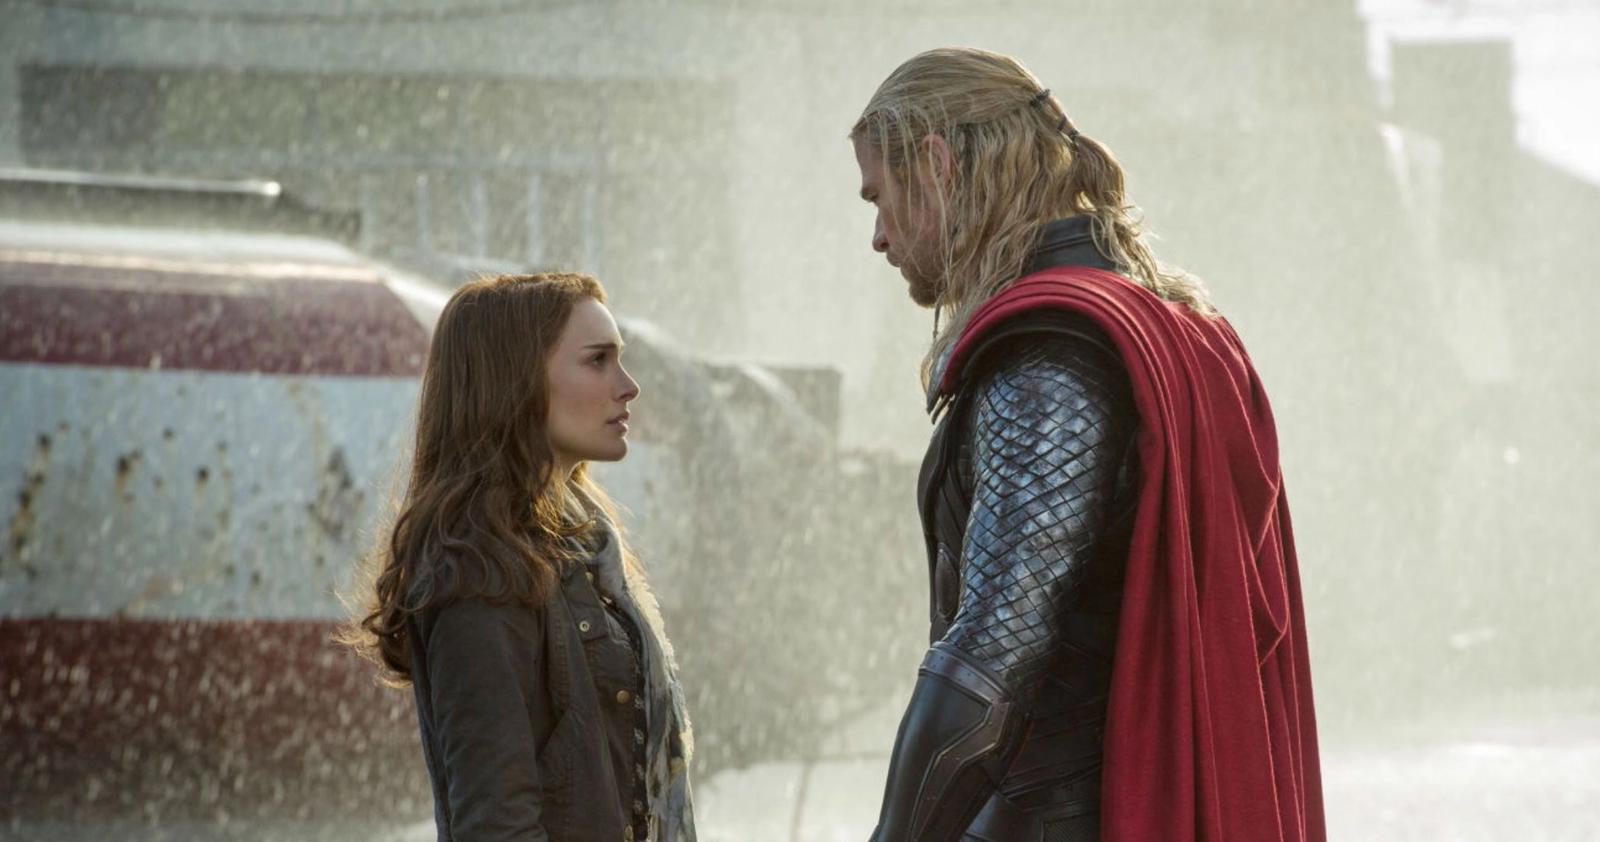 Thor and Jane Foster are looking at each other in the rain.